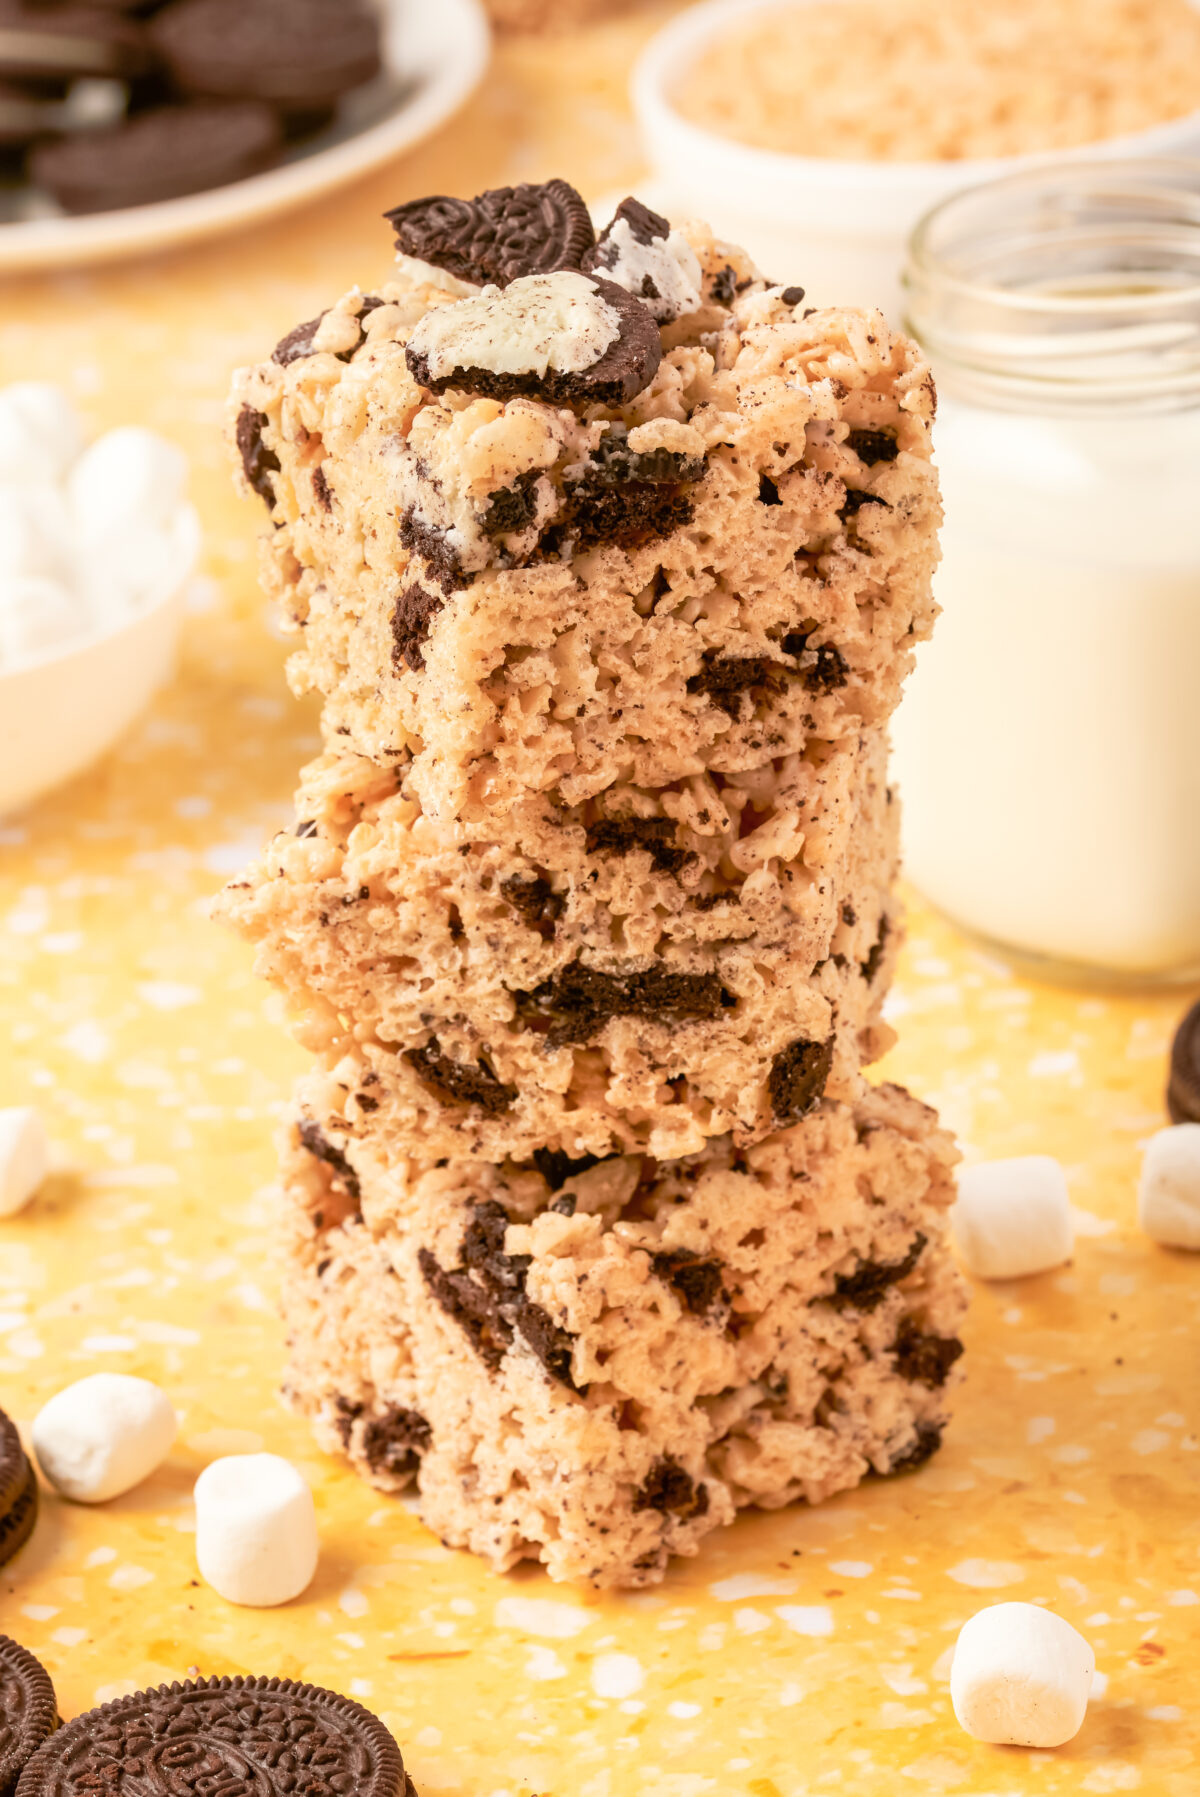 A delicious dessert recipe that the whole family will love. These easy to make Oreo Rice Krispie Treats are sure to please!